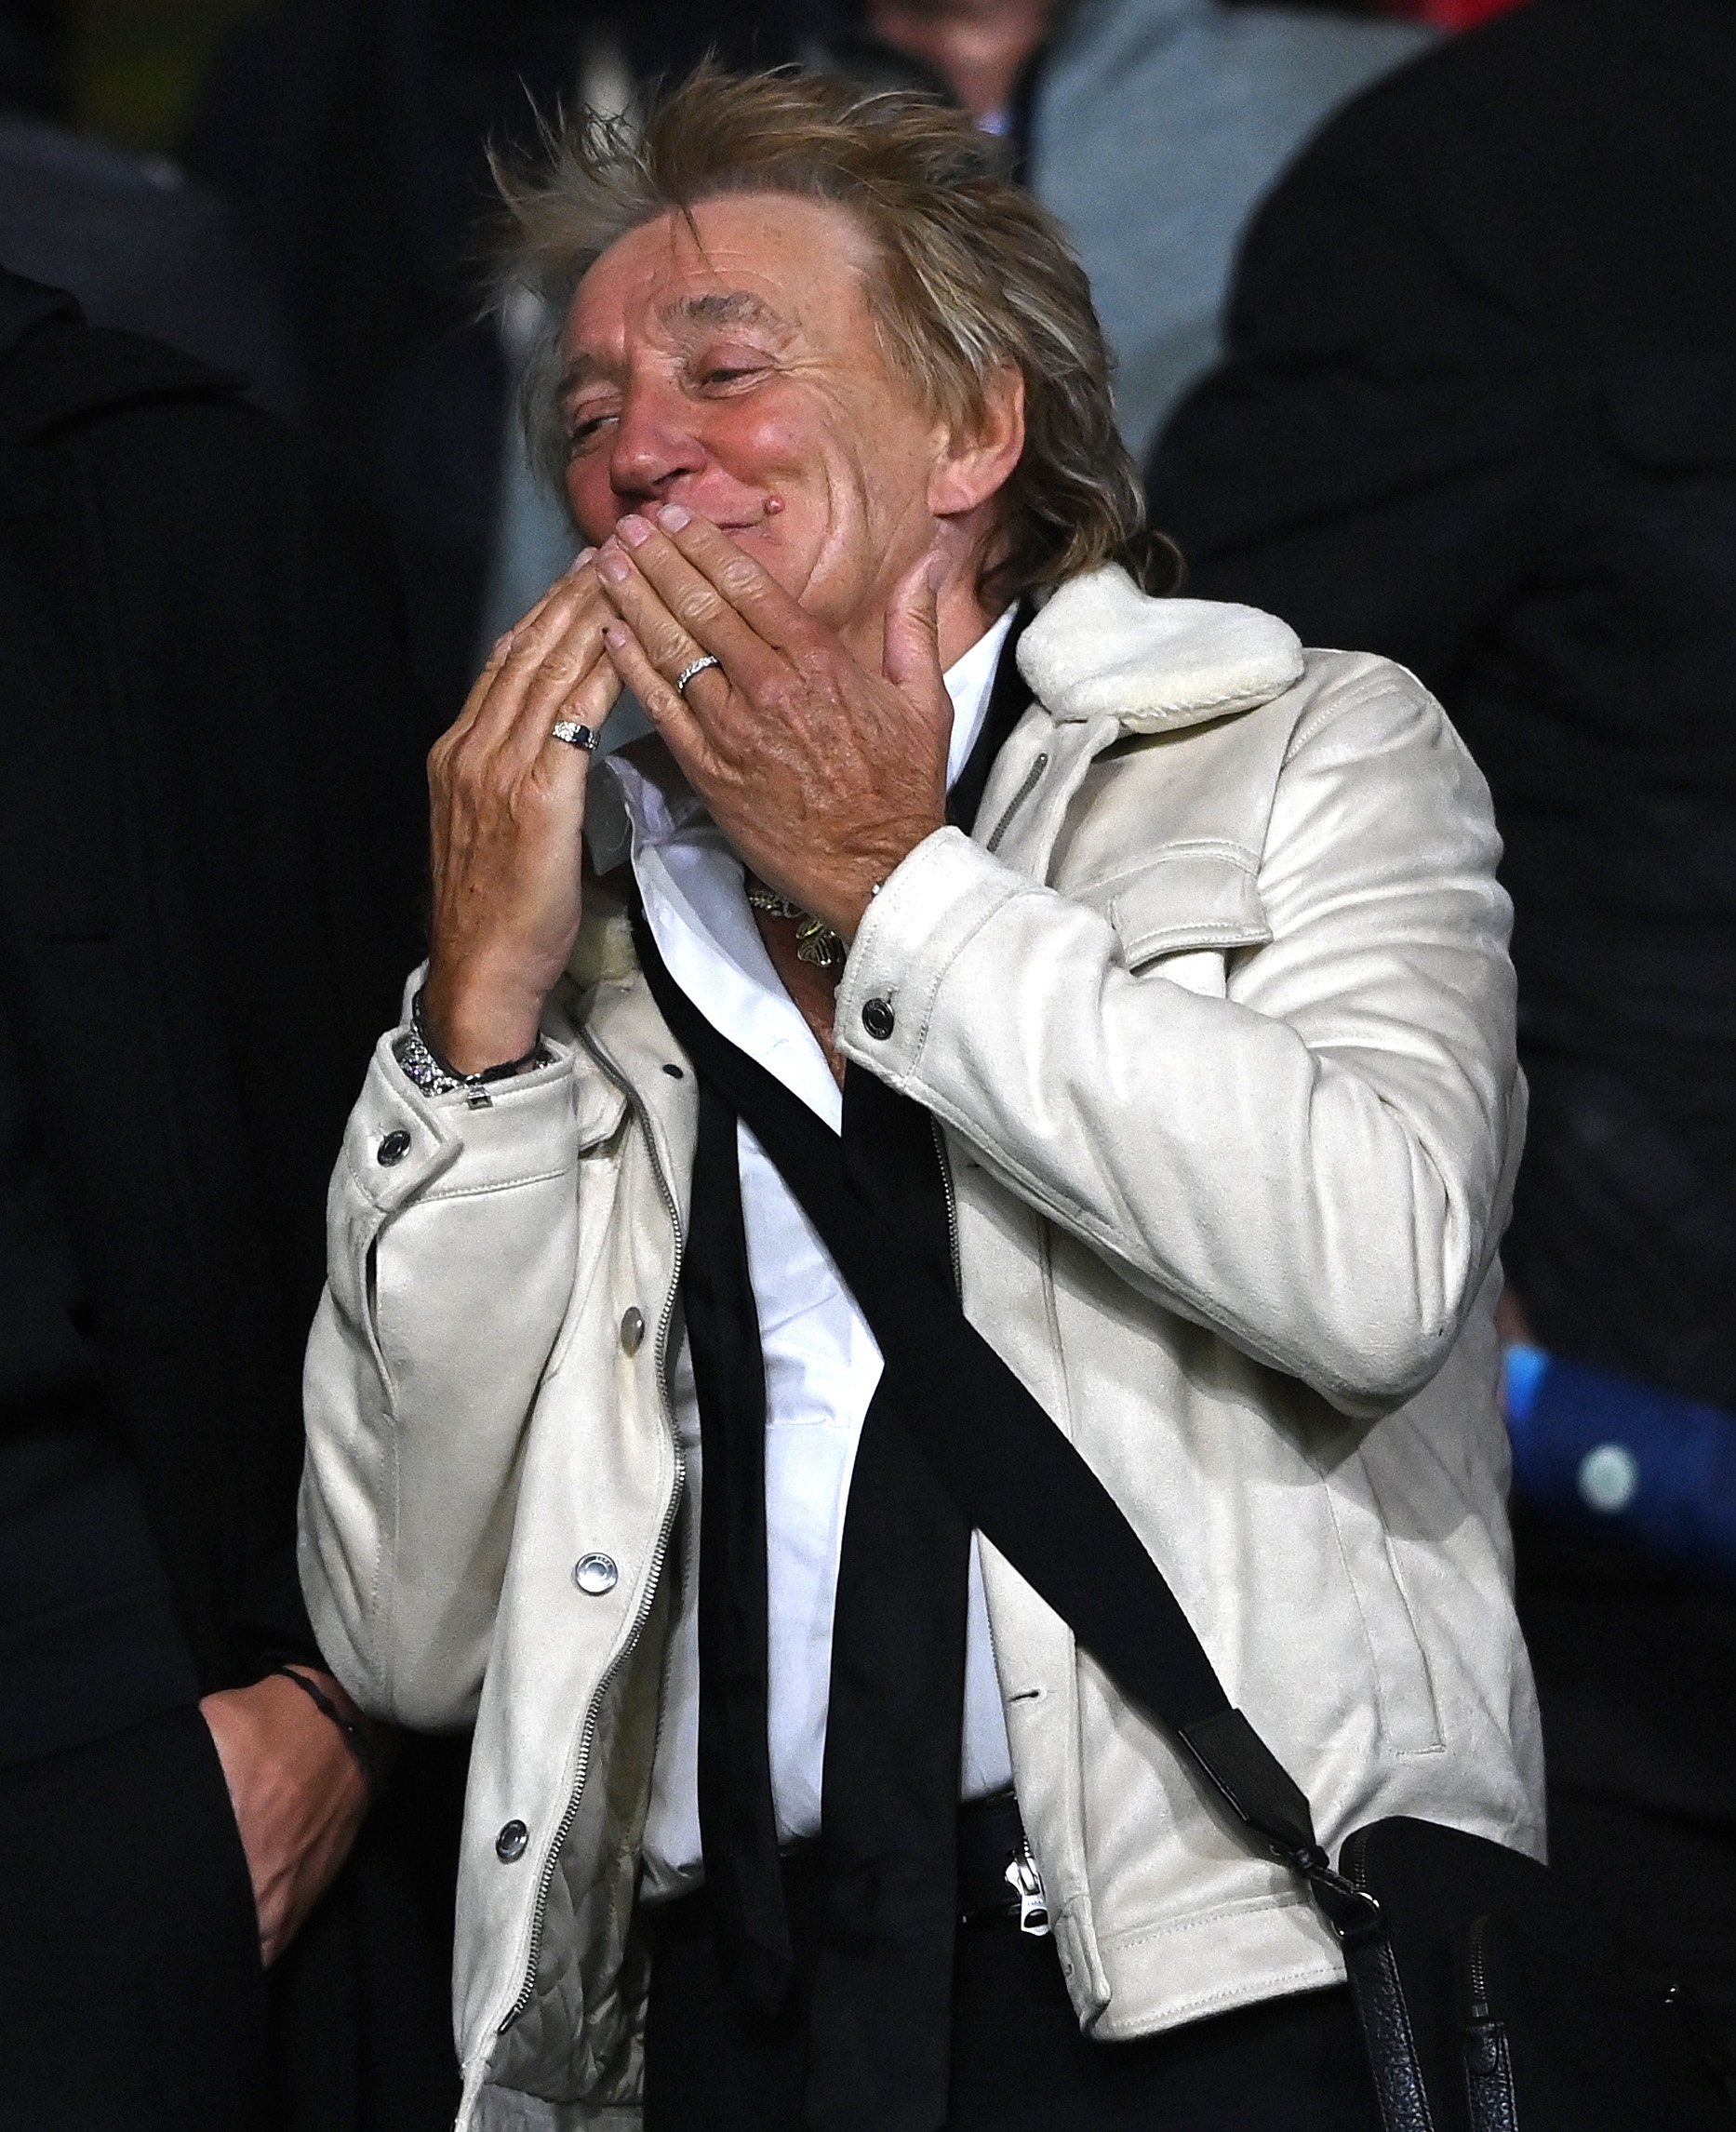 Sir Rod Stewart during the UEFA Champions League match on October 11, 2022, in Glasgow, Scotland | Source: Getty Images